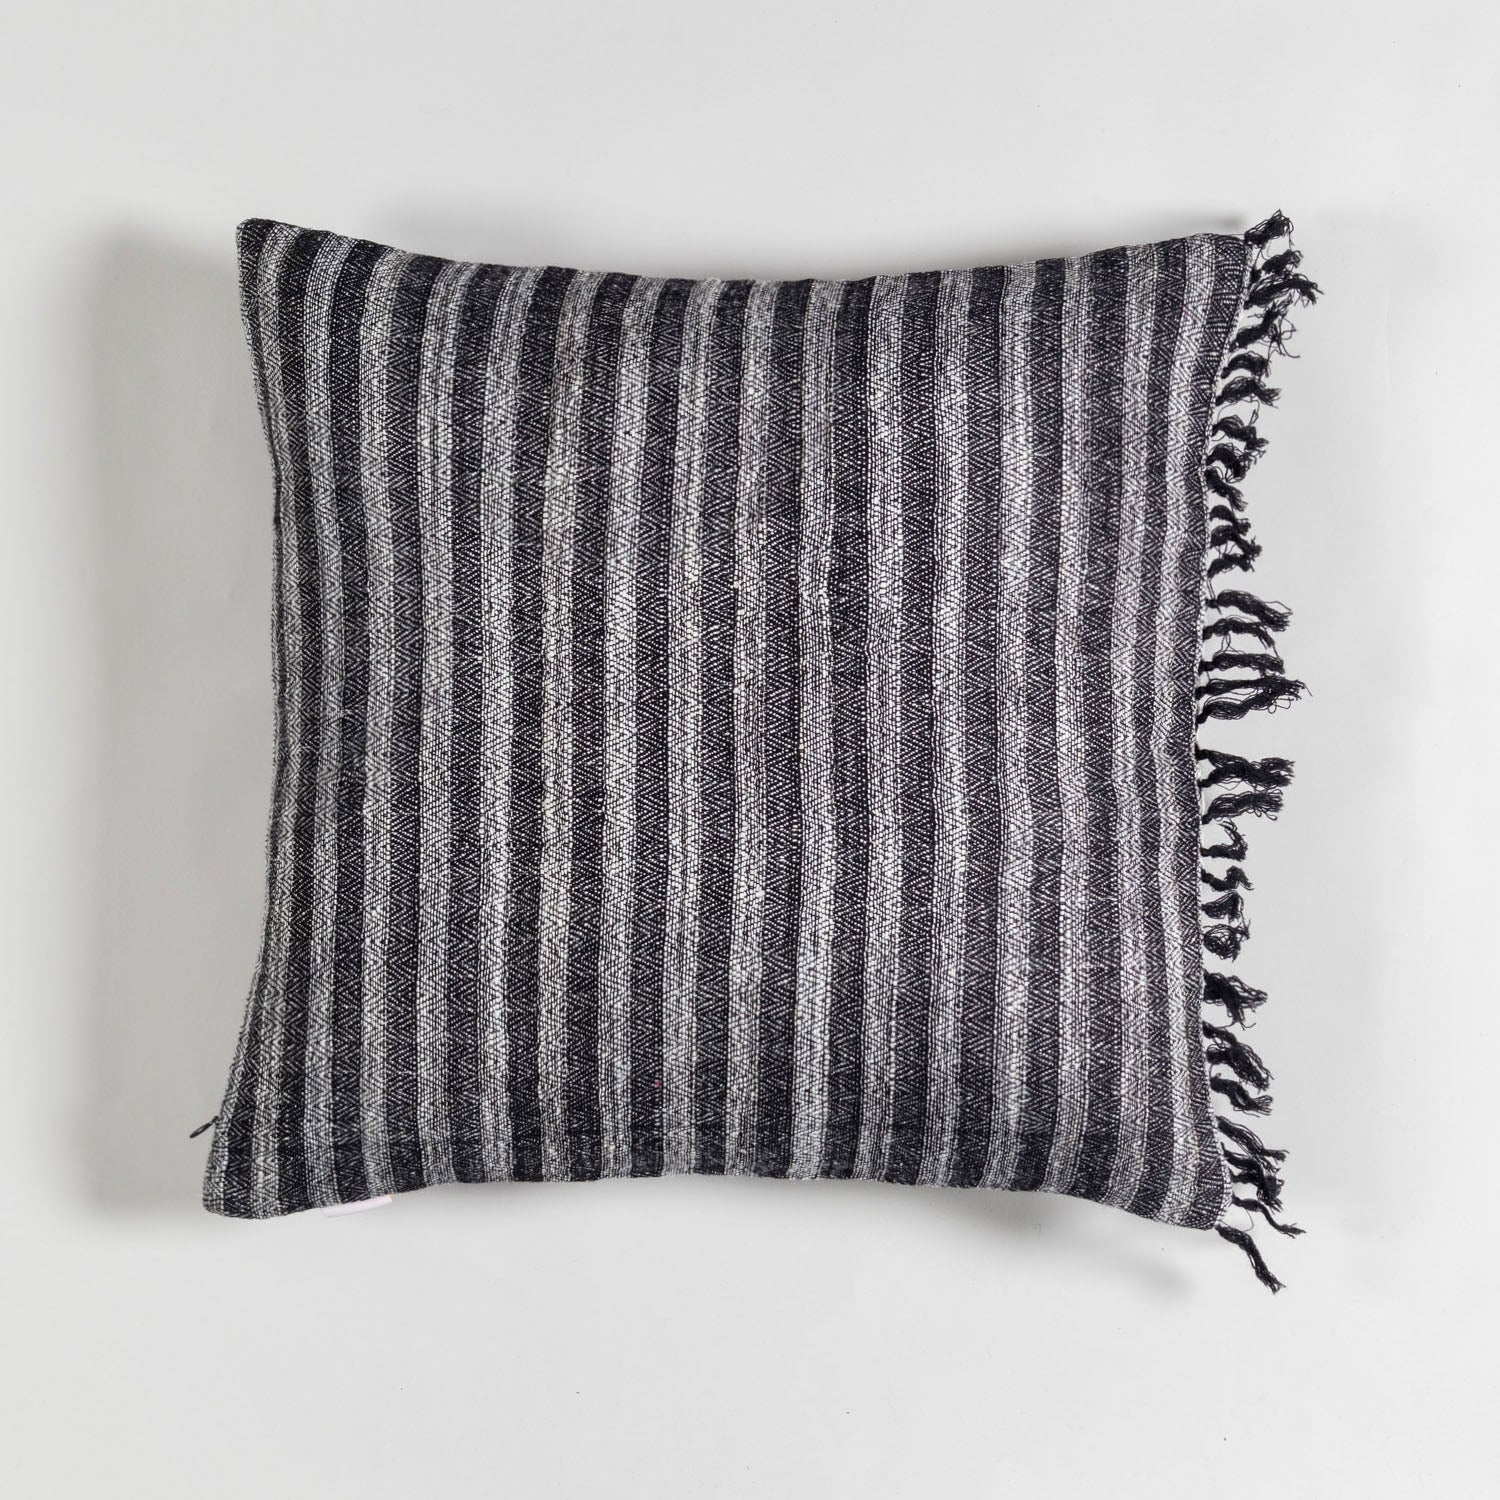 Handwoven Upcycled Black & White Wool & Oak Silk Cushion Cover - 18x18